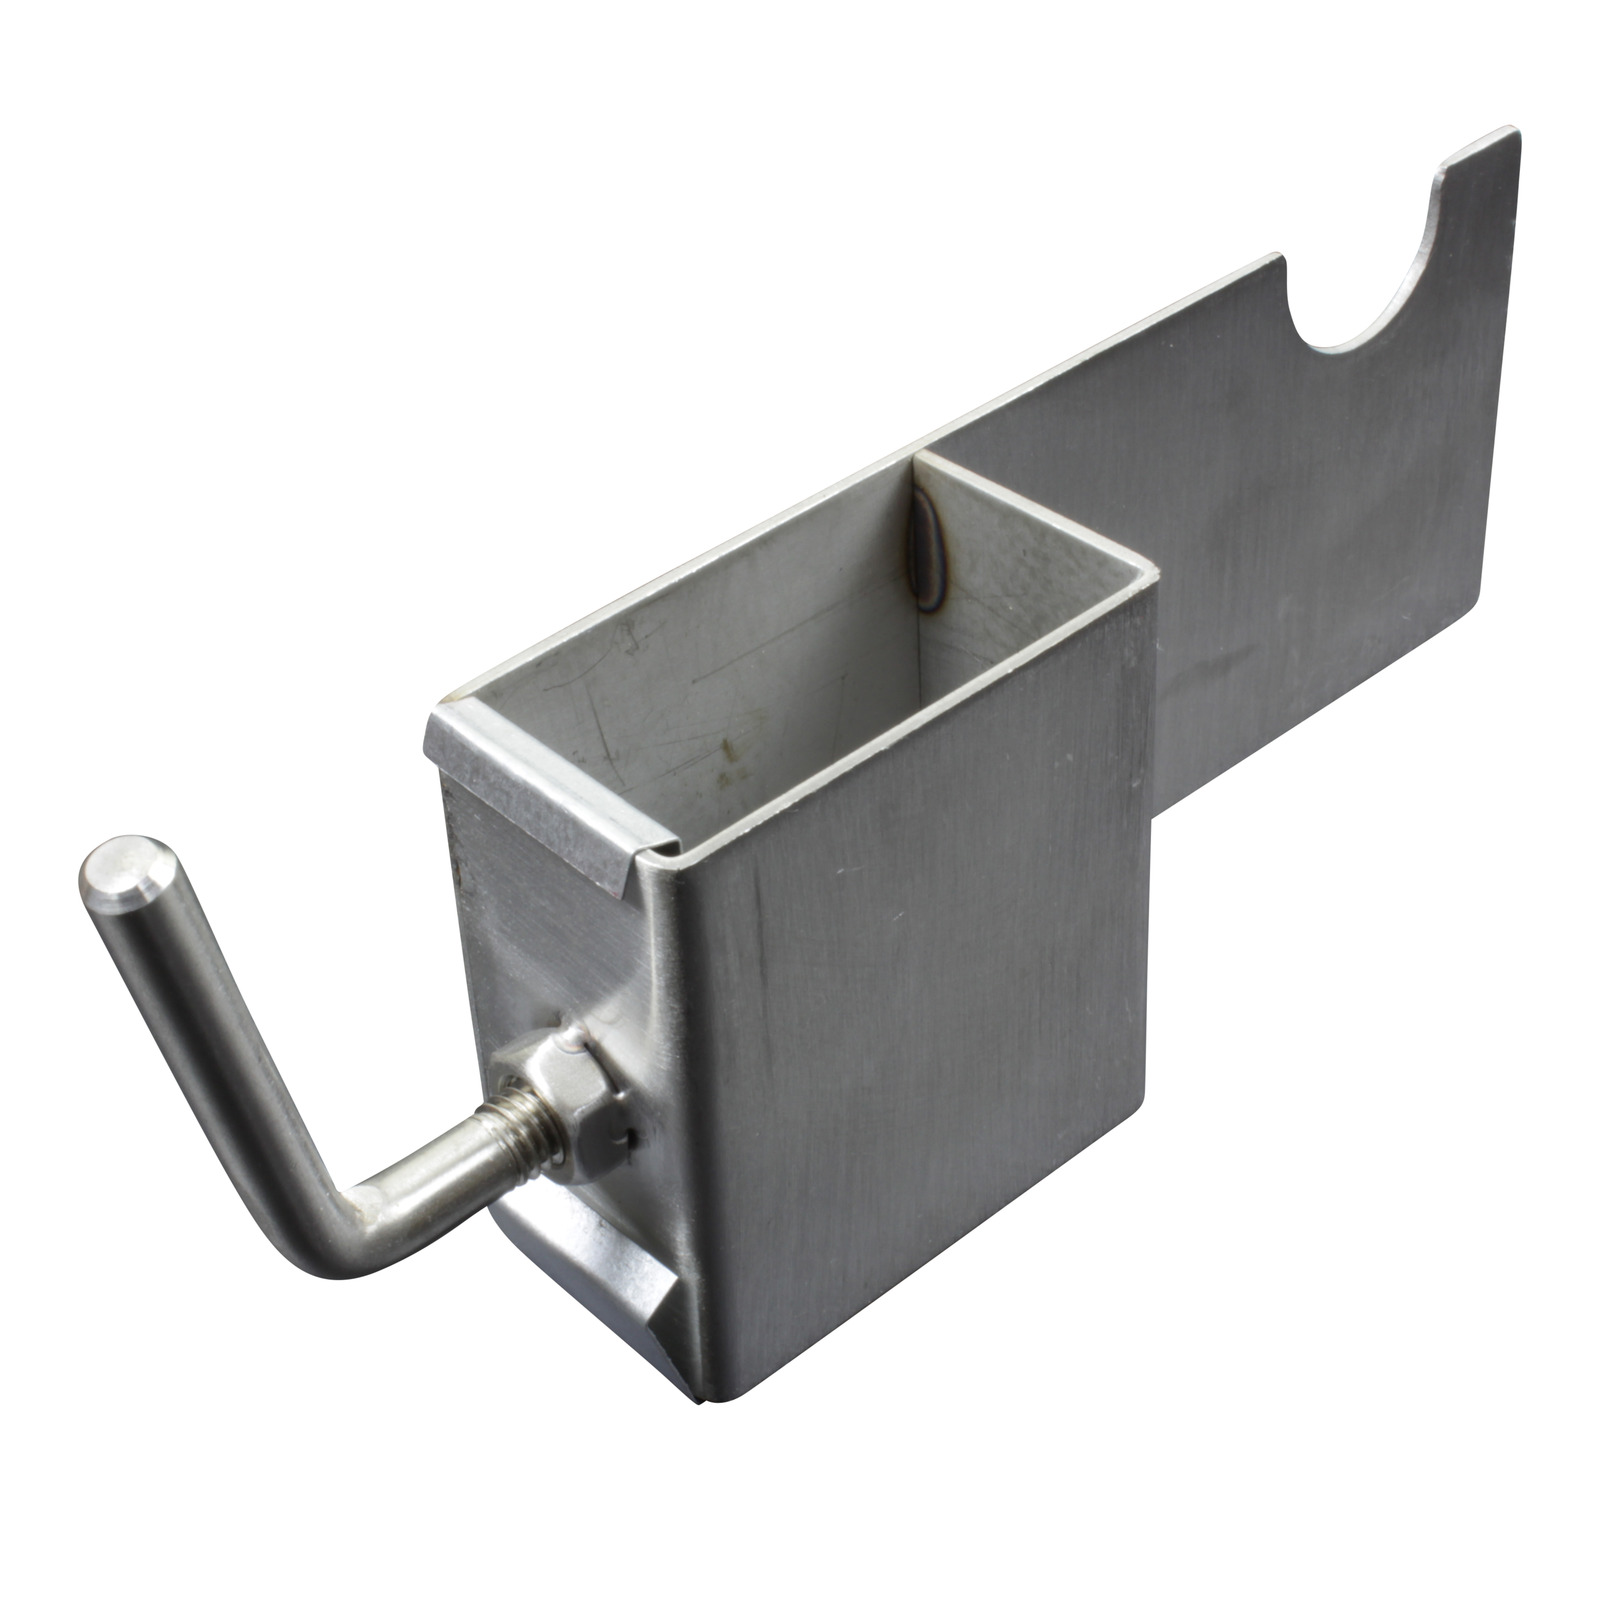 Left & Right Skewer Support Bracket Stainless Steel Suit 85kg Motor from The BBQ Store - SSB-6008K